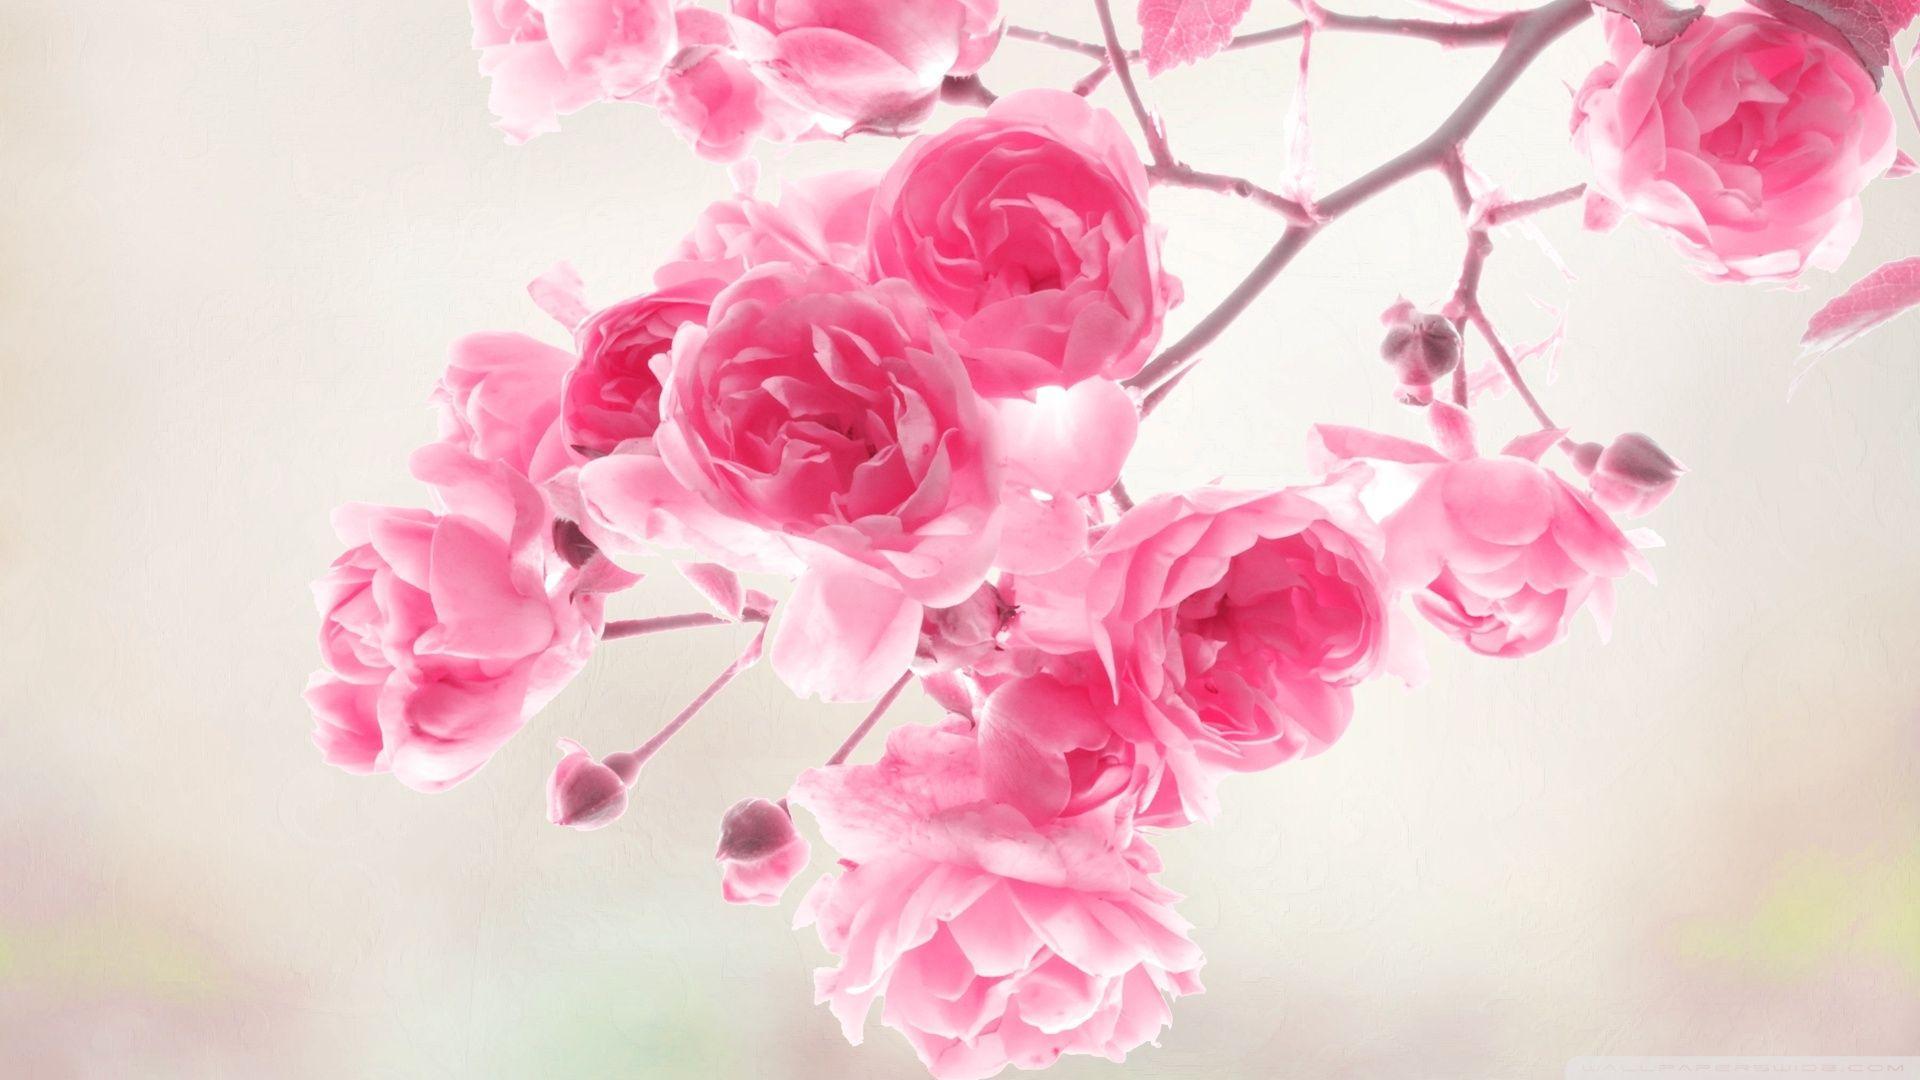 Wallpapers For > Vintage Flower Wallpapers Pink